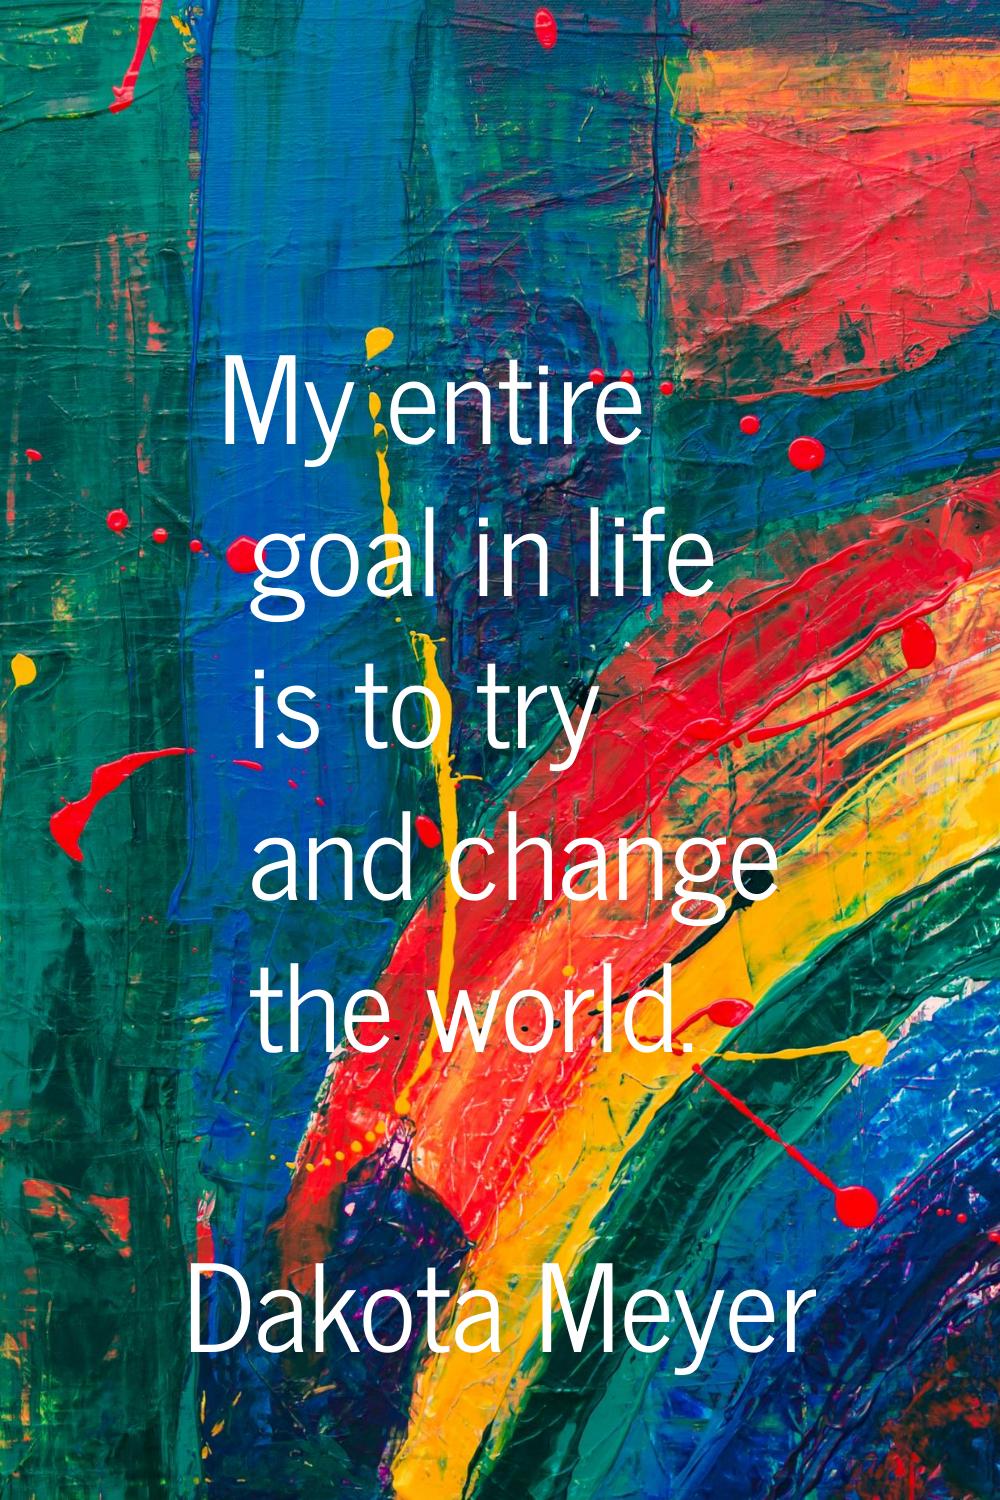 My entire goal in life is to try and change the world.